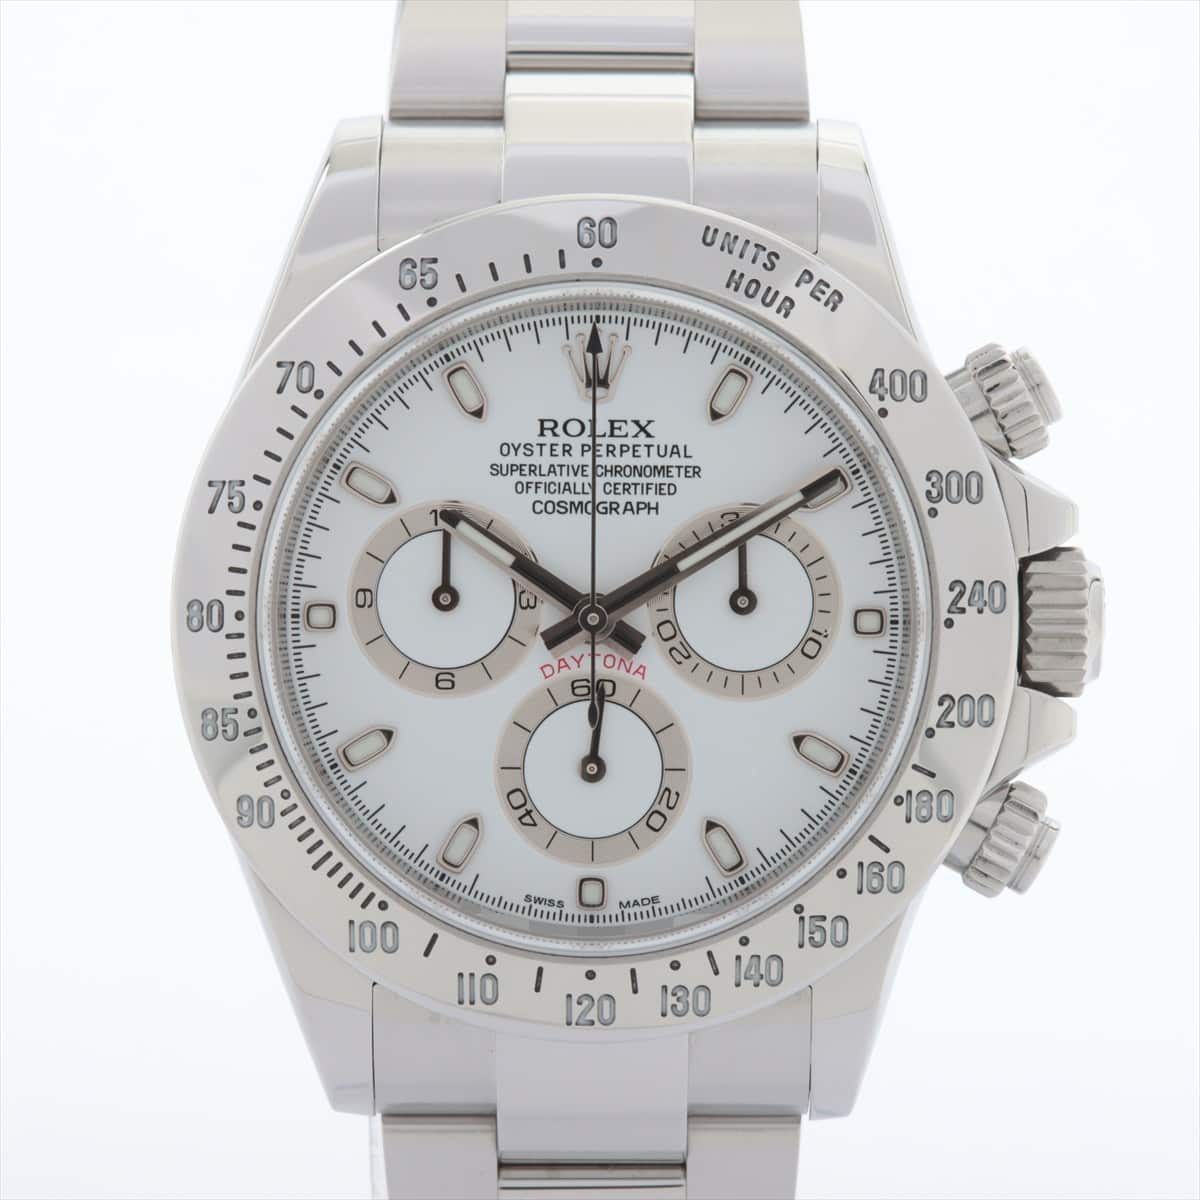 Rolex Daytona 116520 SS AT White-Face Extra Link 1